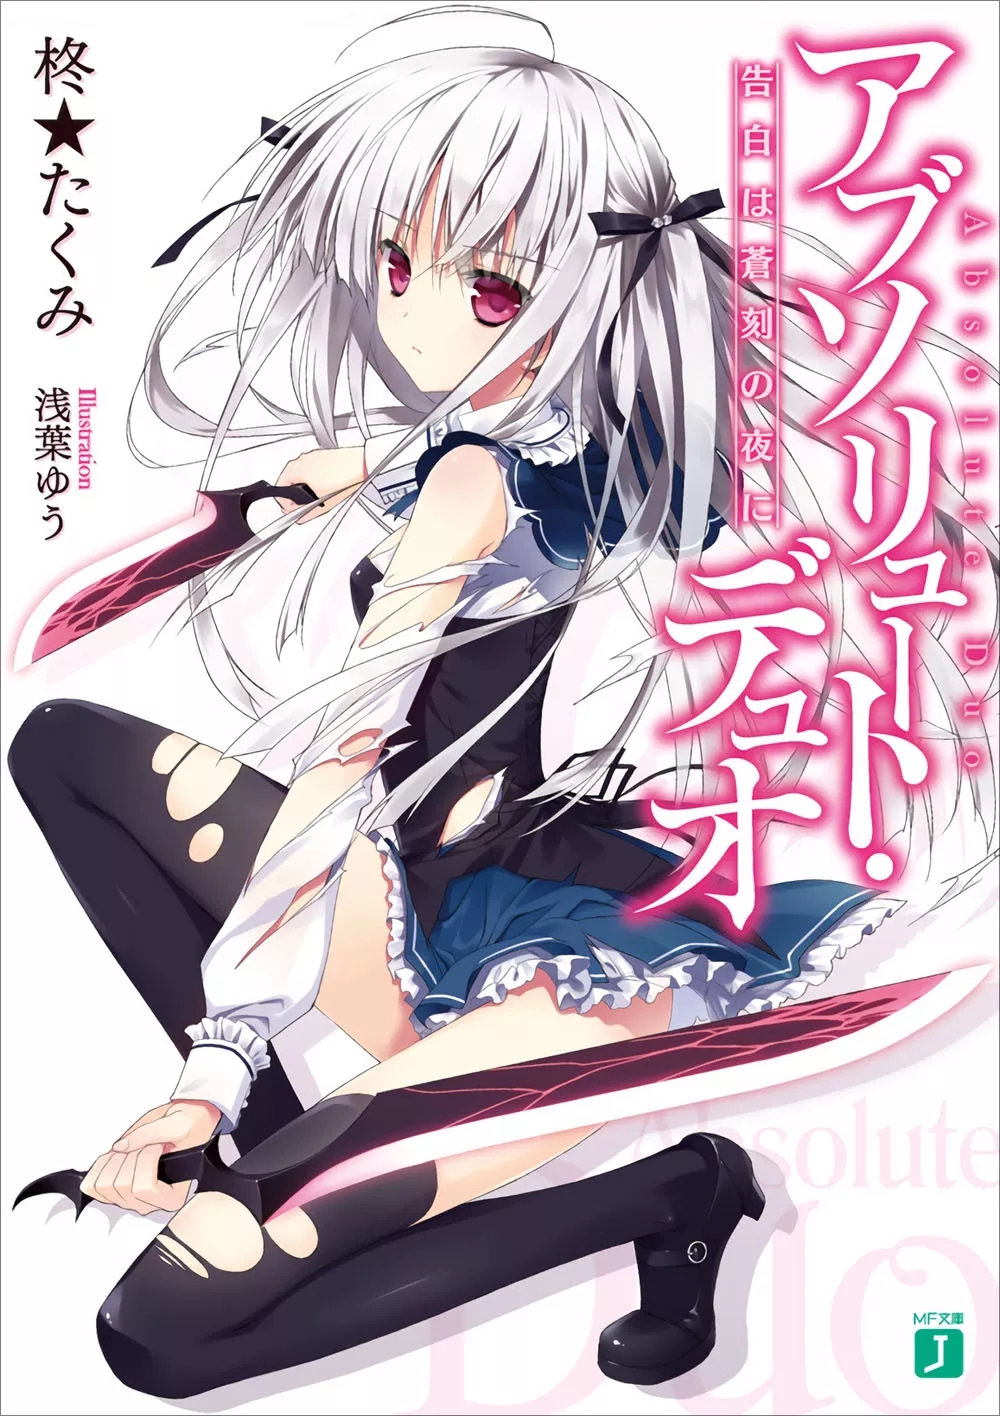 Absolute Duo Vol. 3 See more